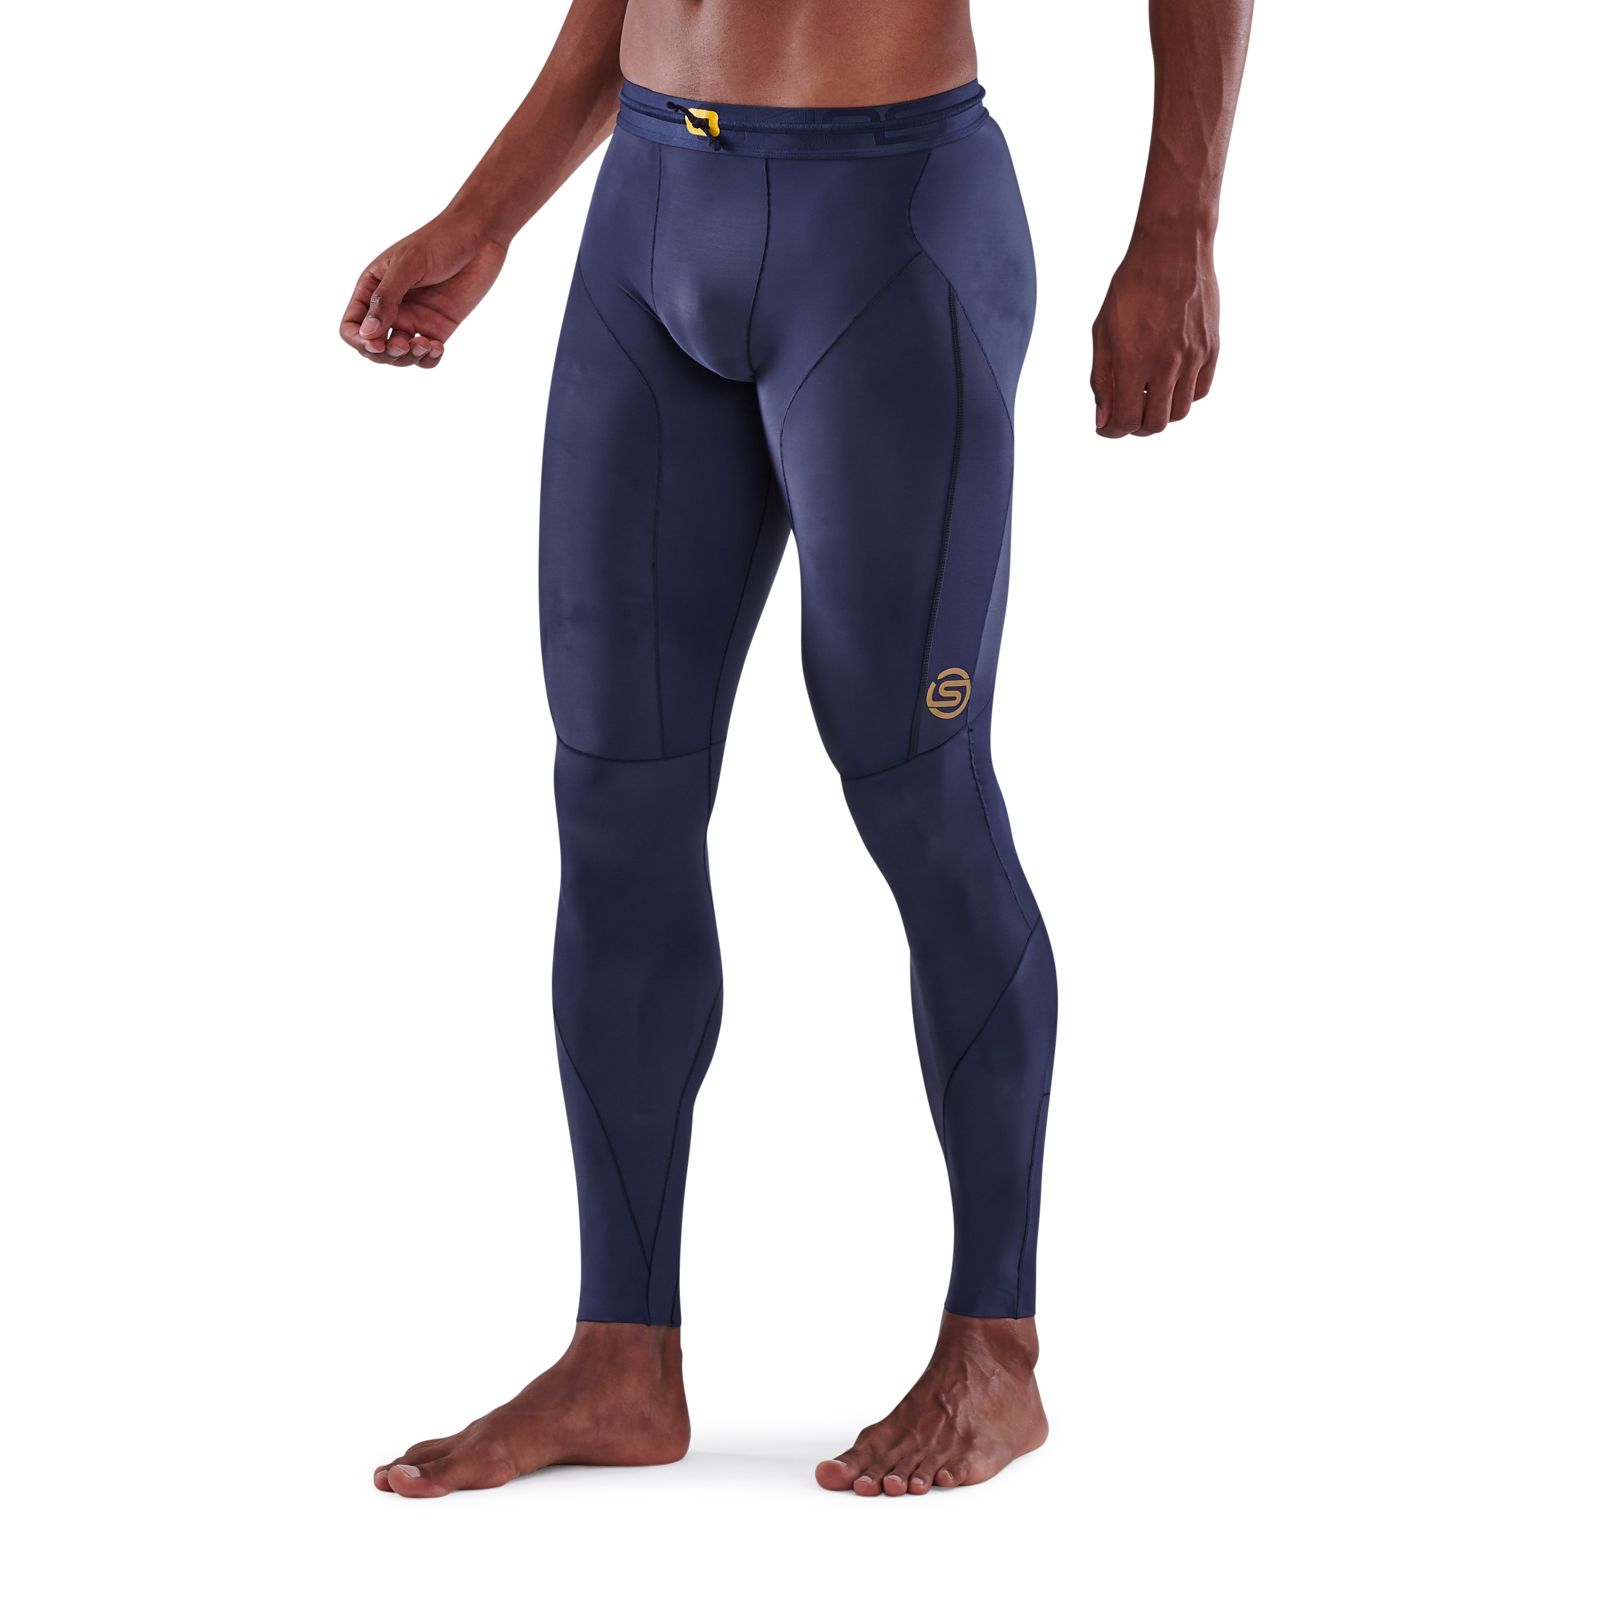 Cipher Skin on X: It's soccer season! Here's a sneak peak of the Cipher  Skin Smart Leggings, featuring the most advanced computerized clothing  technology. We're excited to see this complete lower-body player